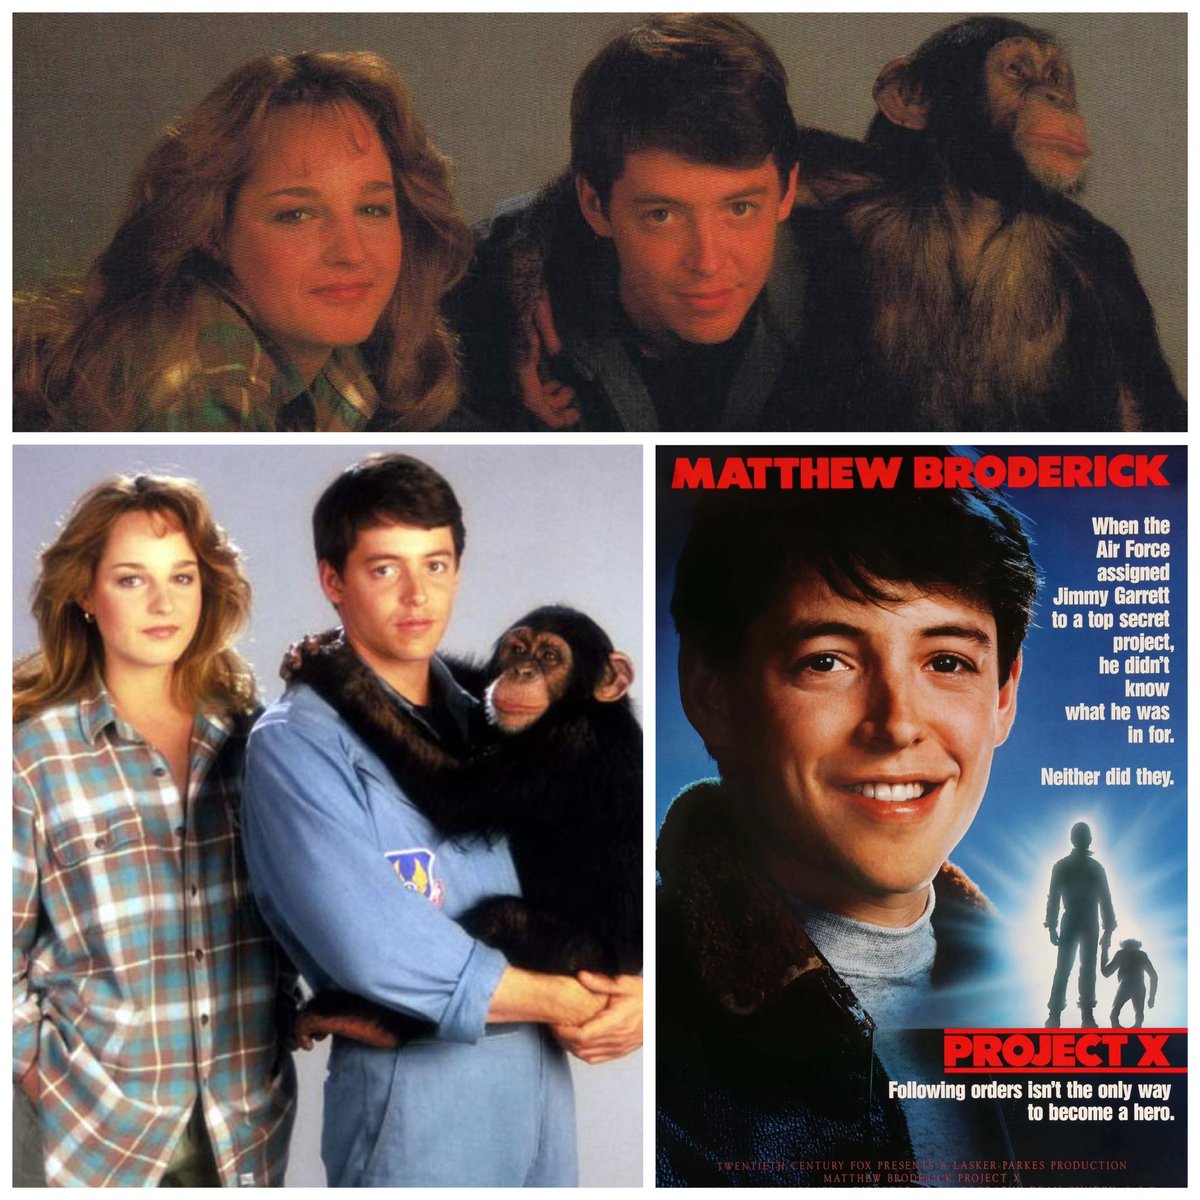 The sci-fi drama ‘Project X’ was released in theaters on this day in 1987.

This movie was on HBO constantly in the late 80’s, as that’s how I first saw it.

#matthewbroderick #helenhunt #projectx #onthisdayinmoviehistory #80sfilms #80smoviesrock #homeboxoffice